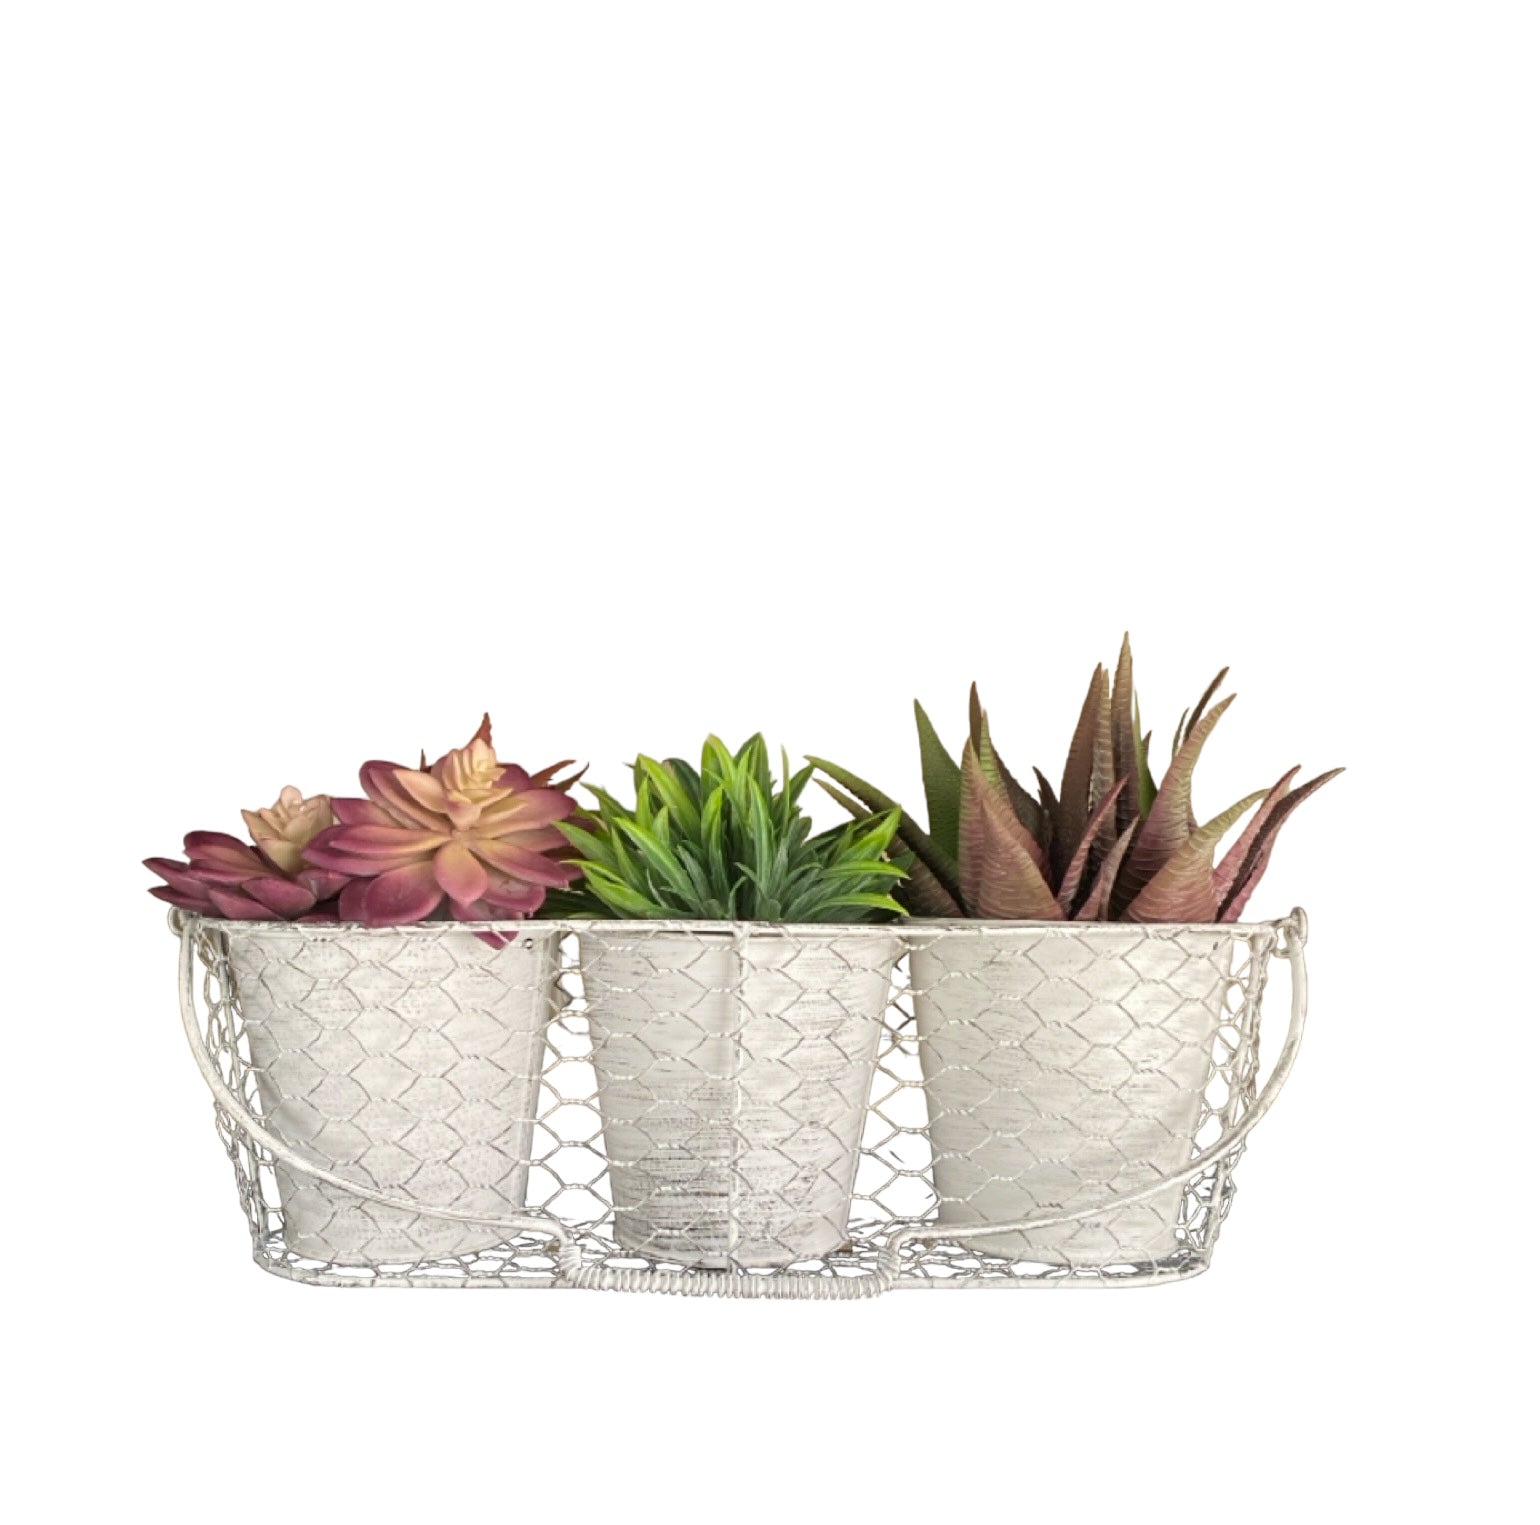 Three Pot Planter Herbs French White - The Renmy Store Homewares & Gifts 